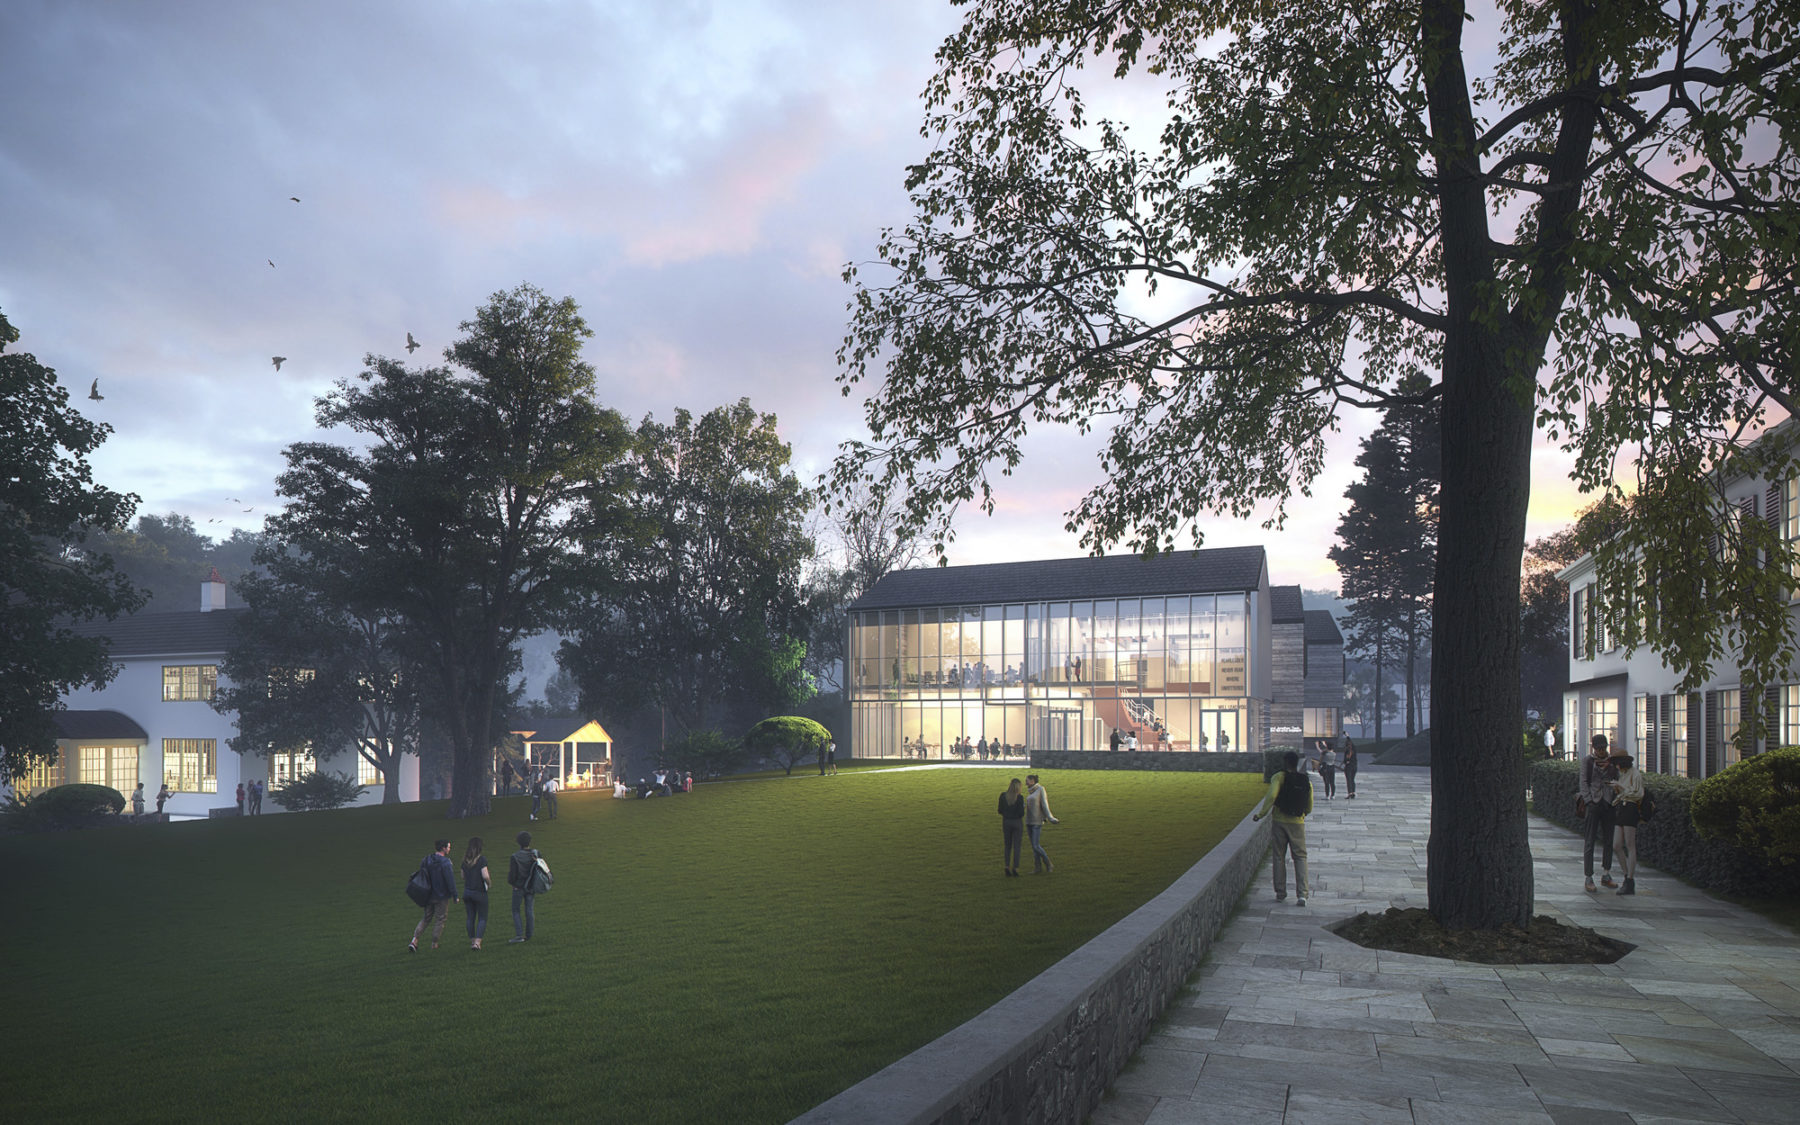 Exterior rendering showing building with glass facade lit up at the end of the campus quad